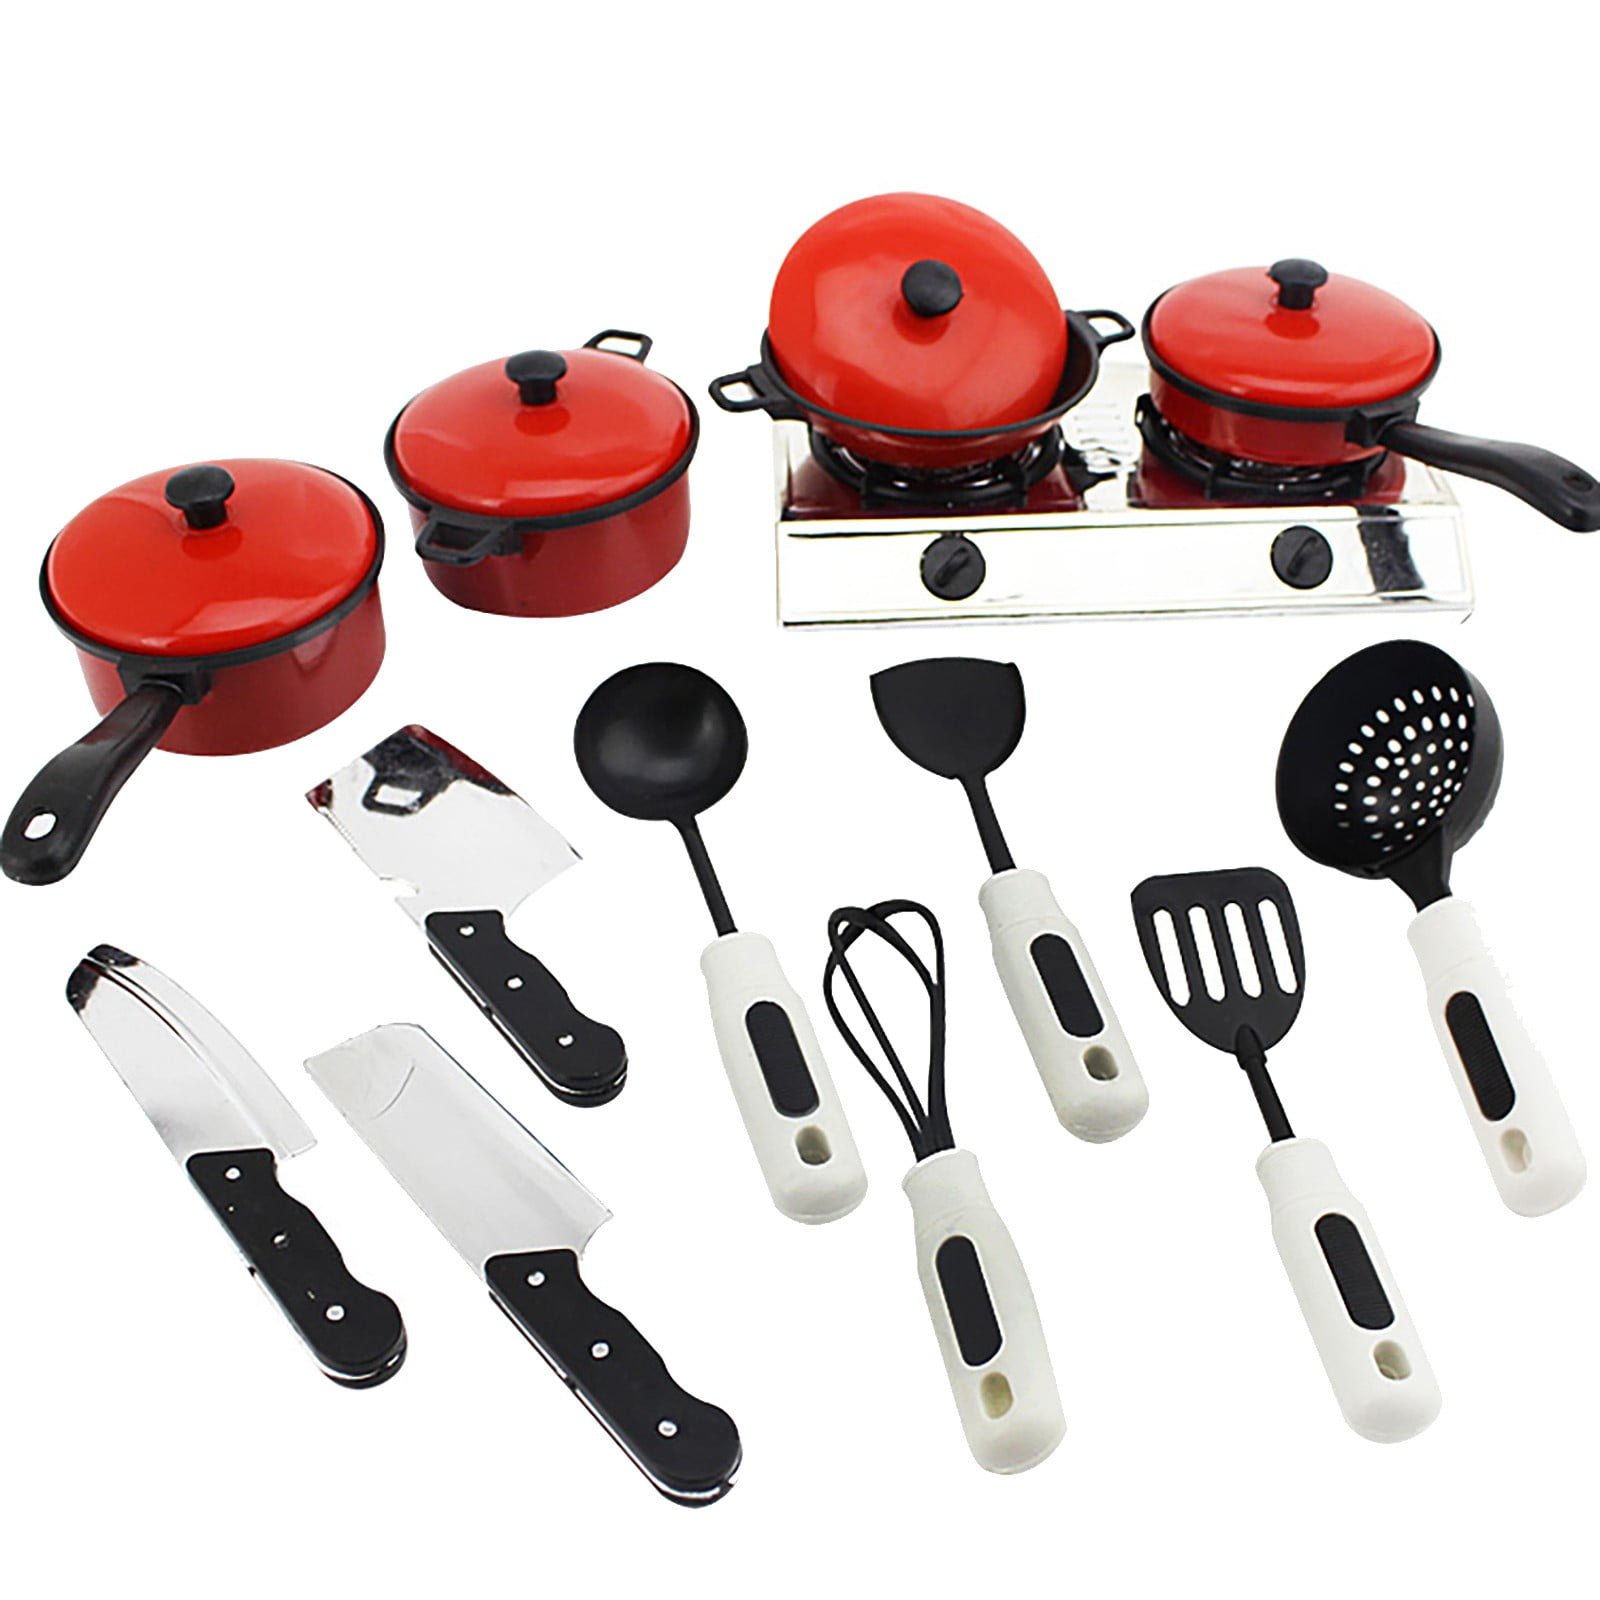 1Set Kids Play House Toy Kitchen Utensils Cooking Pots Pans Food Dishes-Cookw nb 